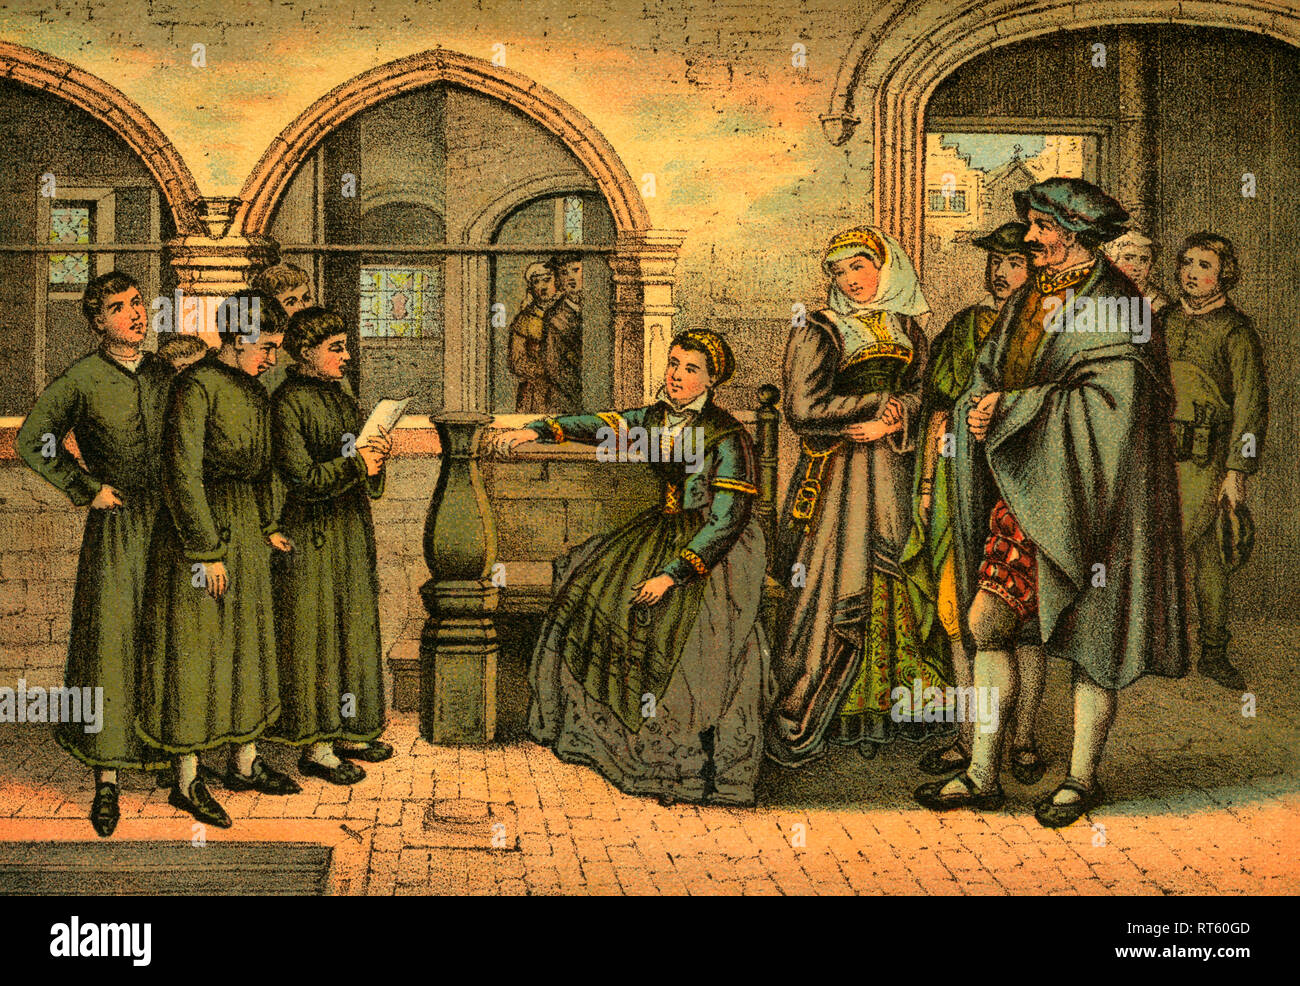 Martin Luther as a Kurrendesänger infront the Cotta family in Eisenach, coloured image (unknown artist) from: 'Doktor Martin Luthers Leben, Thaten und Meinungen (Doctor Martin Luthers life, deeds and opinions...), told by Martin Rade (Paul Martin), published by Hermann Oeser, Neusalza i. S., 1887., Additional-Rights-Clearance-Info-Not-Available Stock Photo